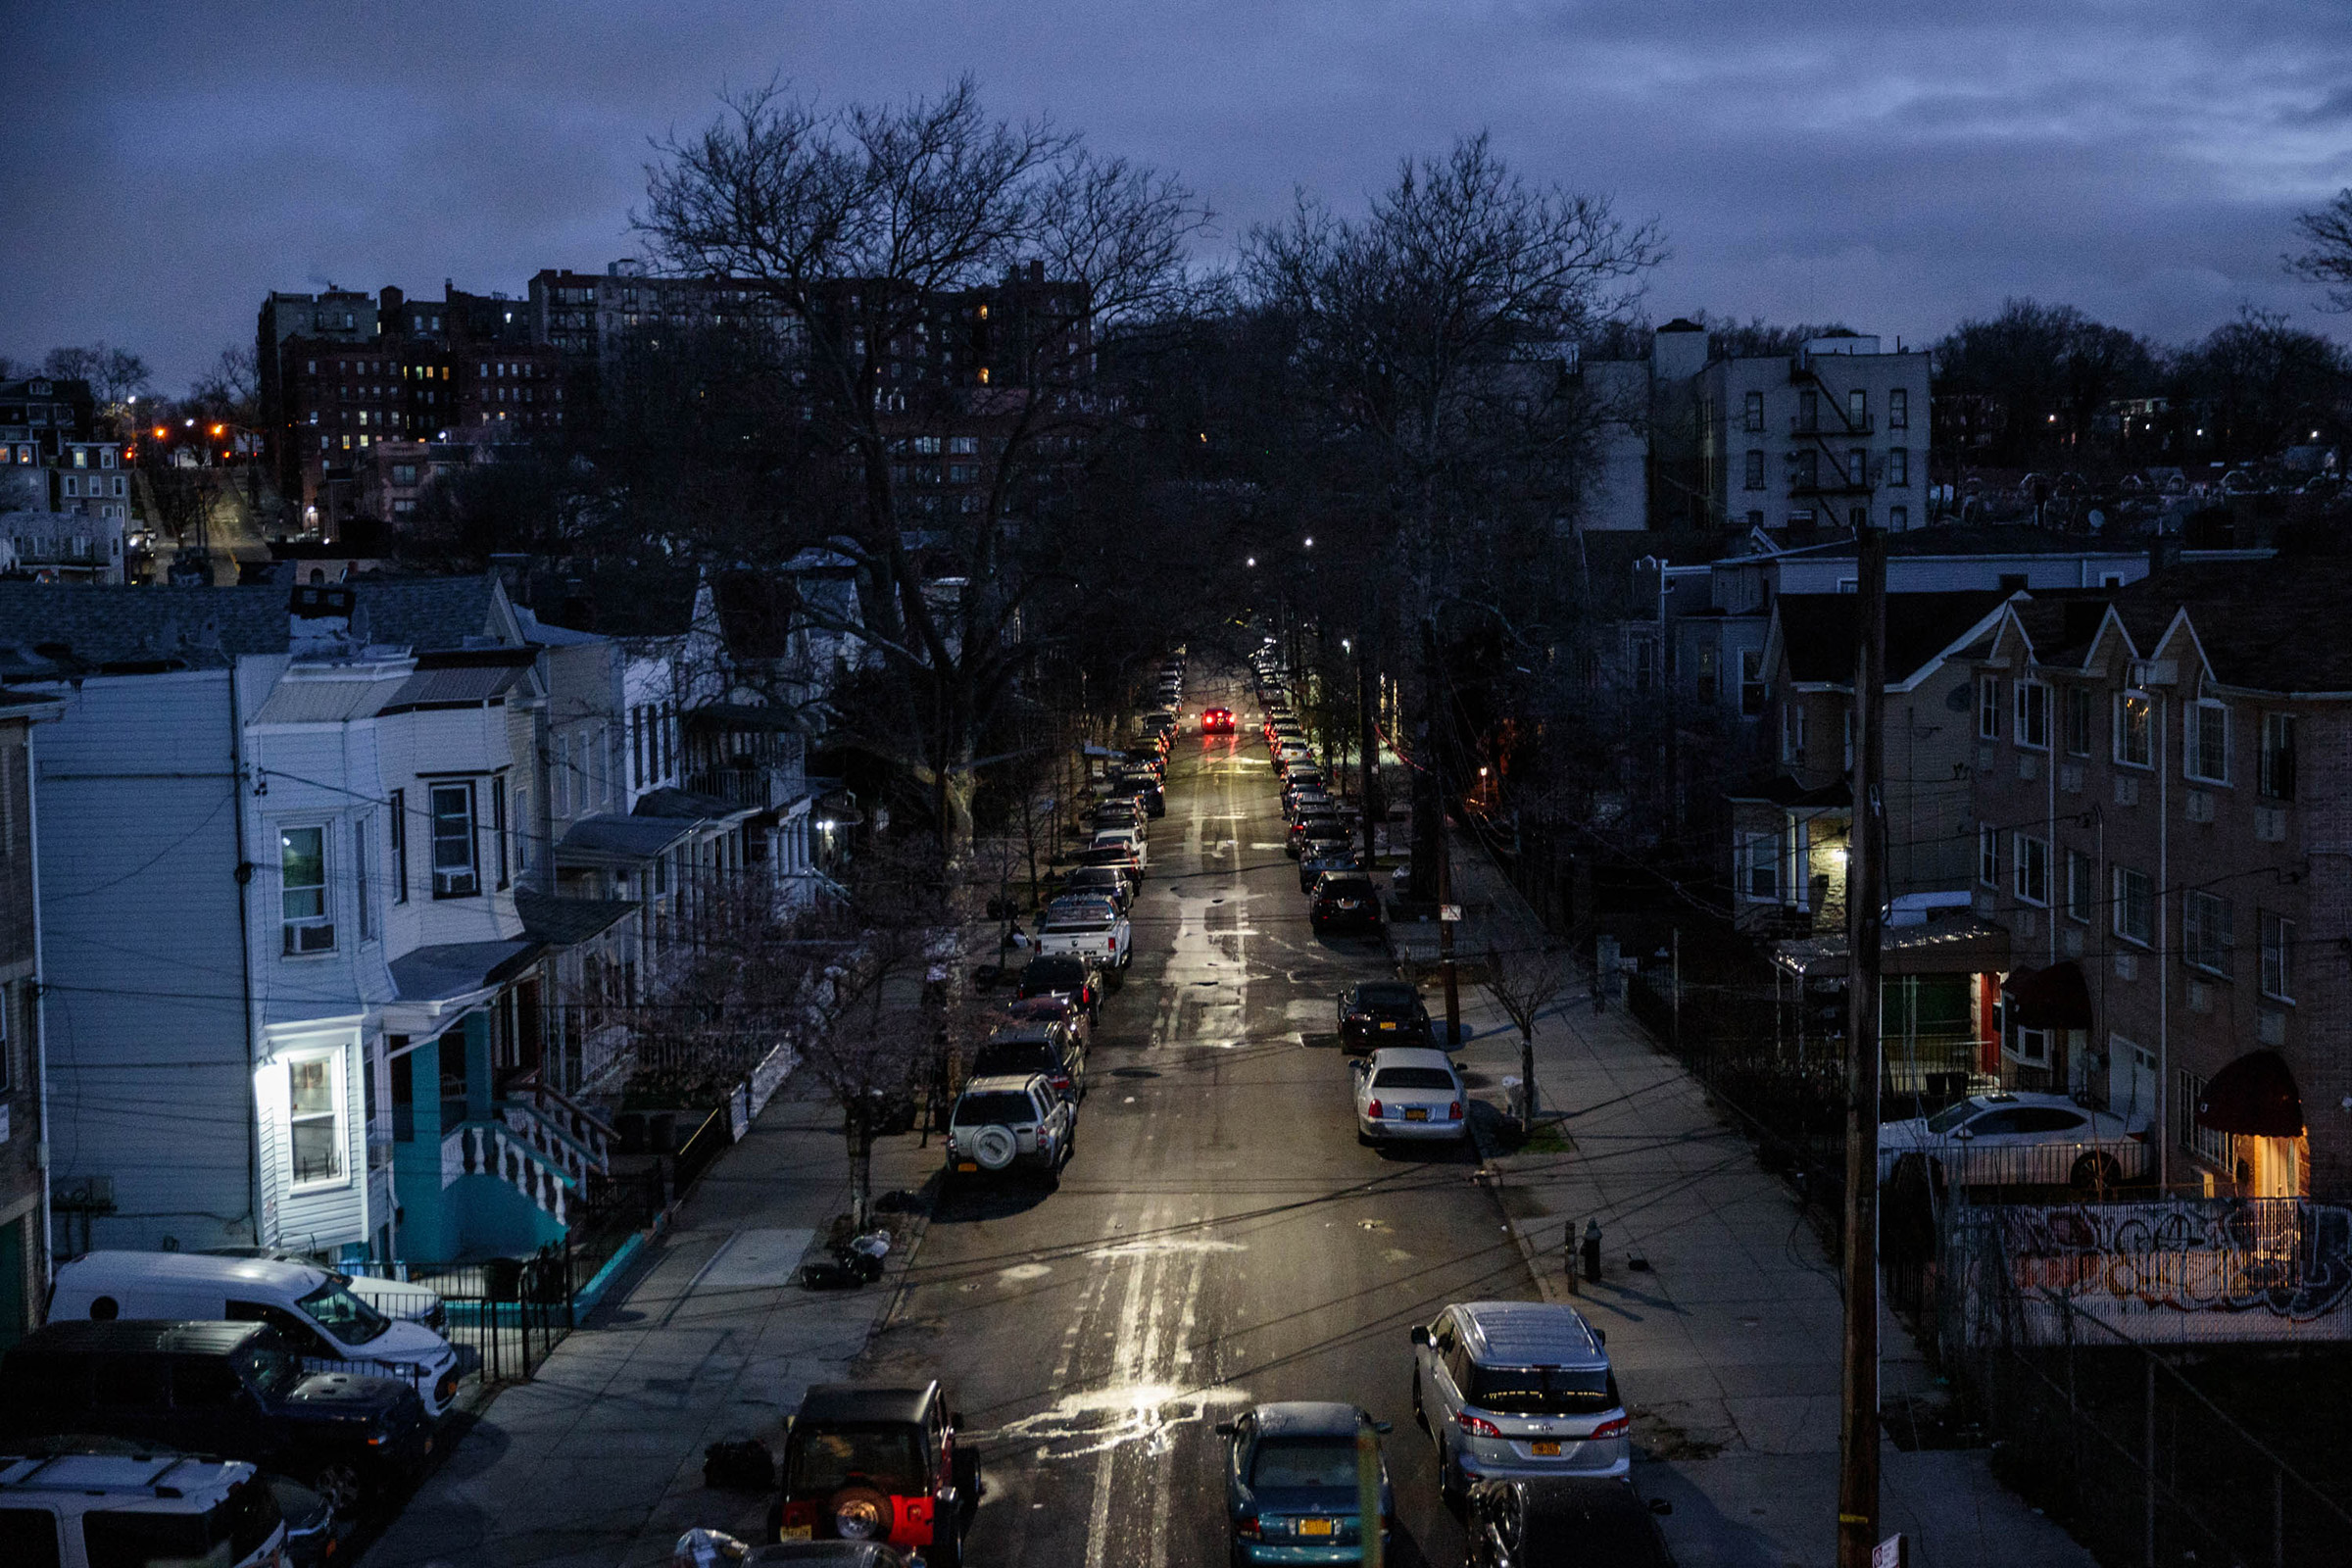 Early morning twilight over Brooklyn on March 24. Mayor DeBlasio declared a state of emergency in New York City last week, and large gatherings have been banned, and all nonessential businesses across the state have been ordered to close. (Sarah Blesener)